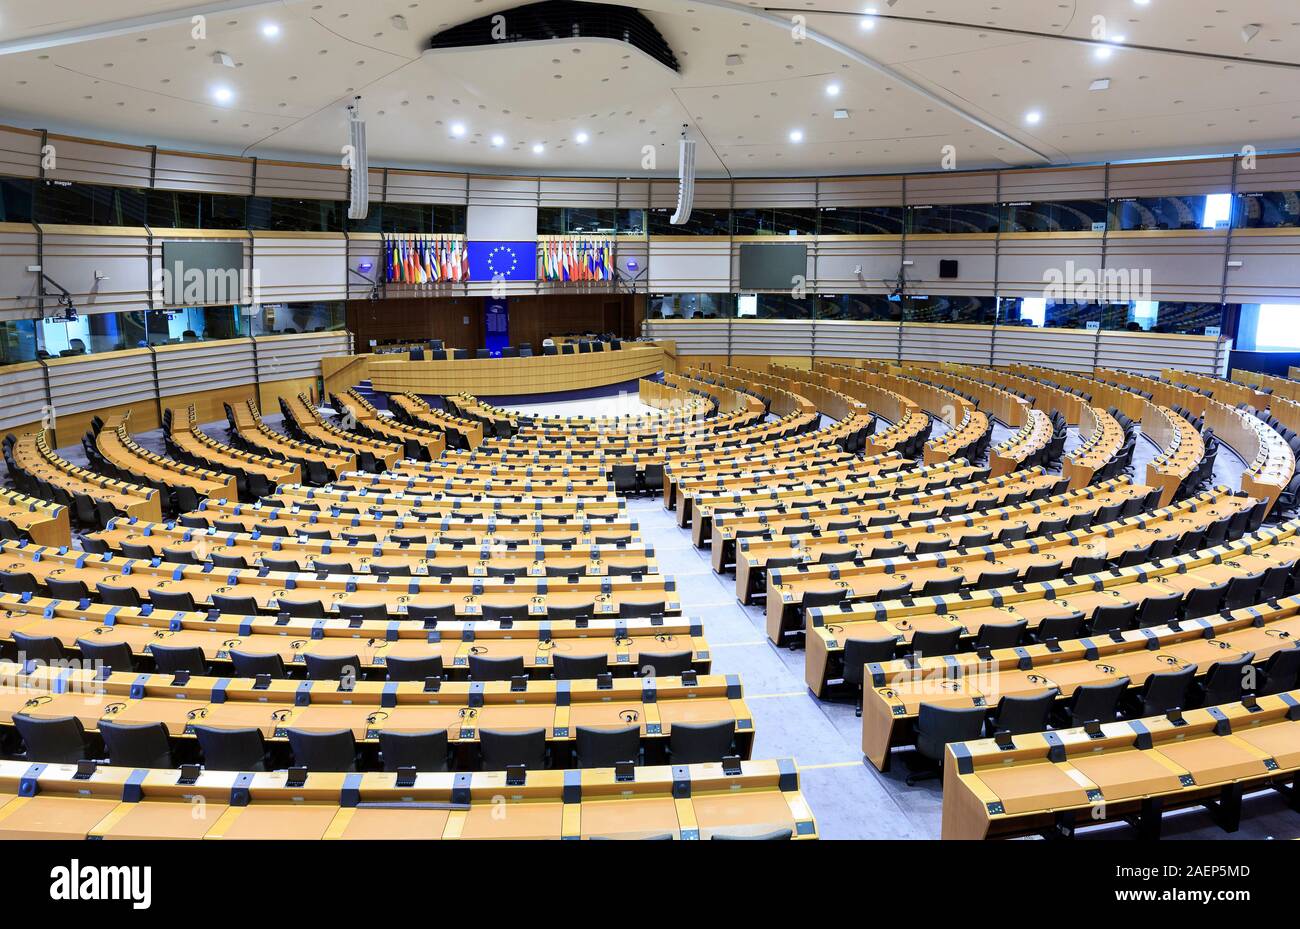 Belgium, Brussels, on June 4, 2019: empty hemicycle of the European Parliament Stock Photo